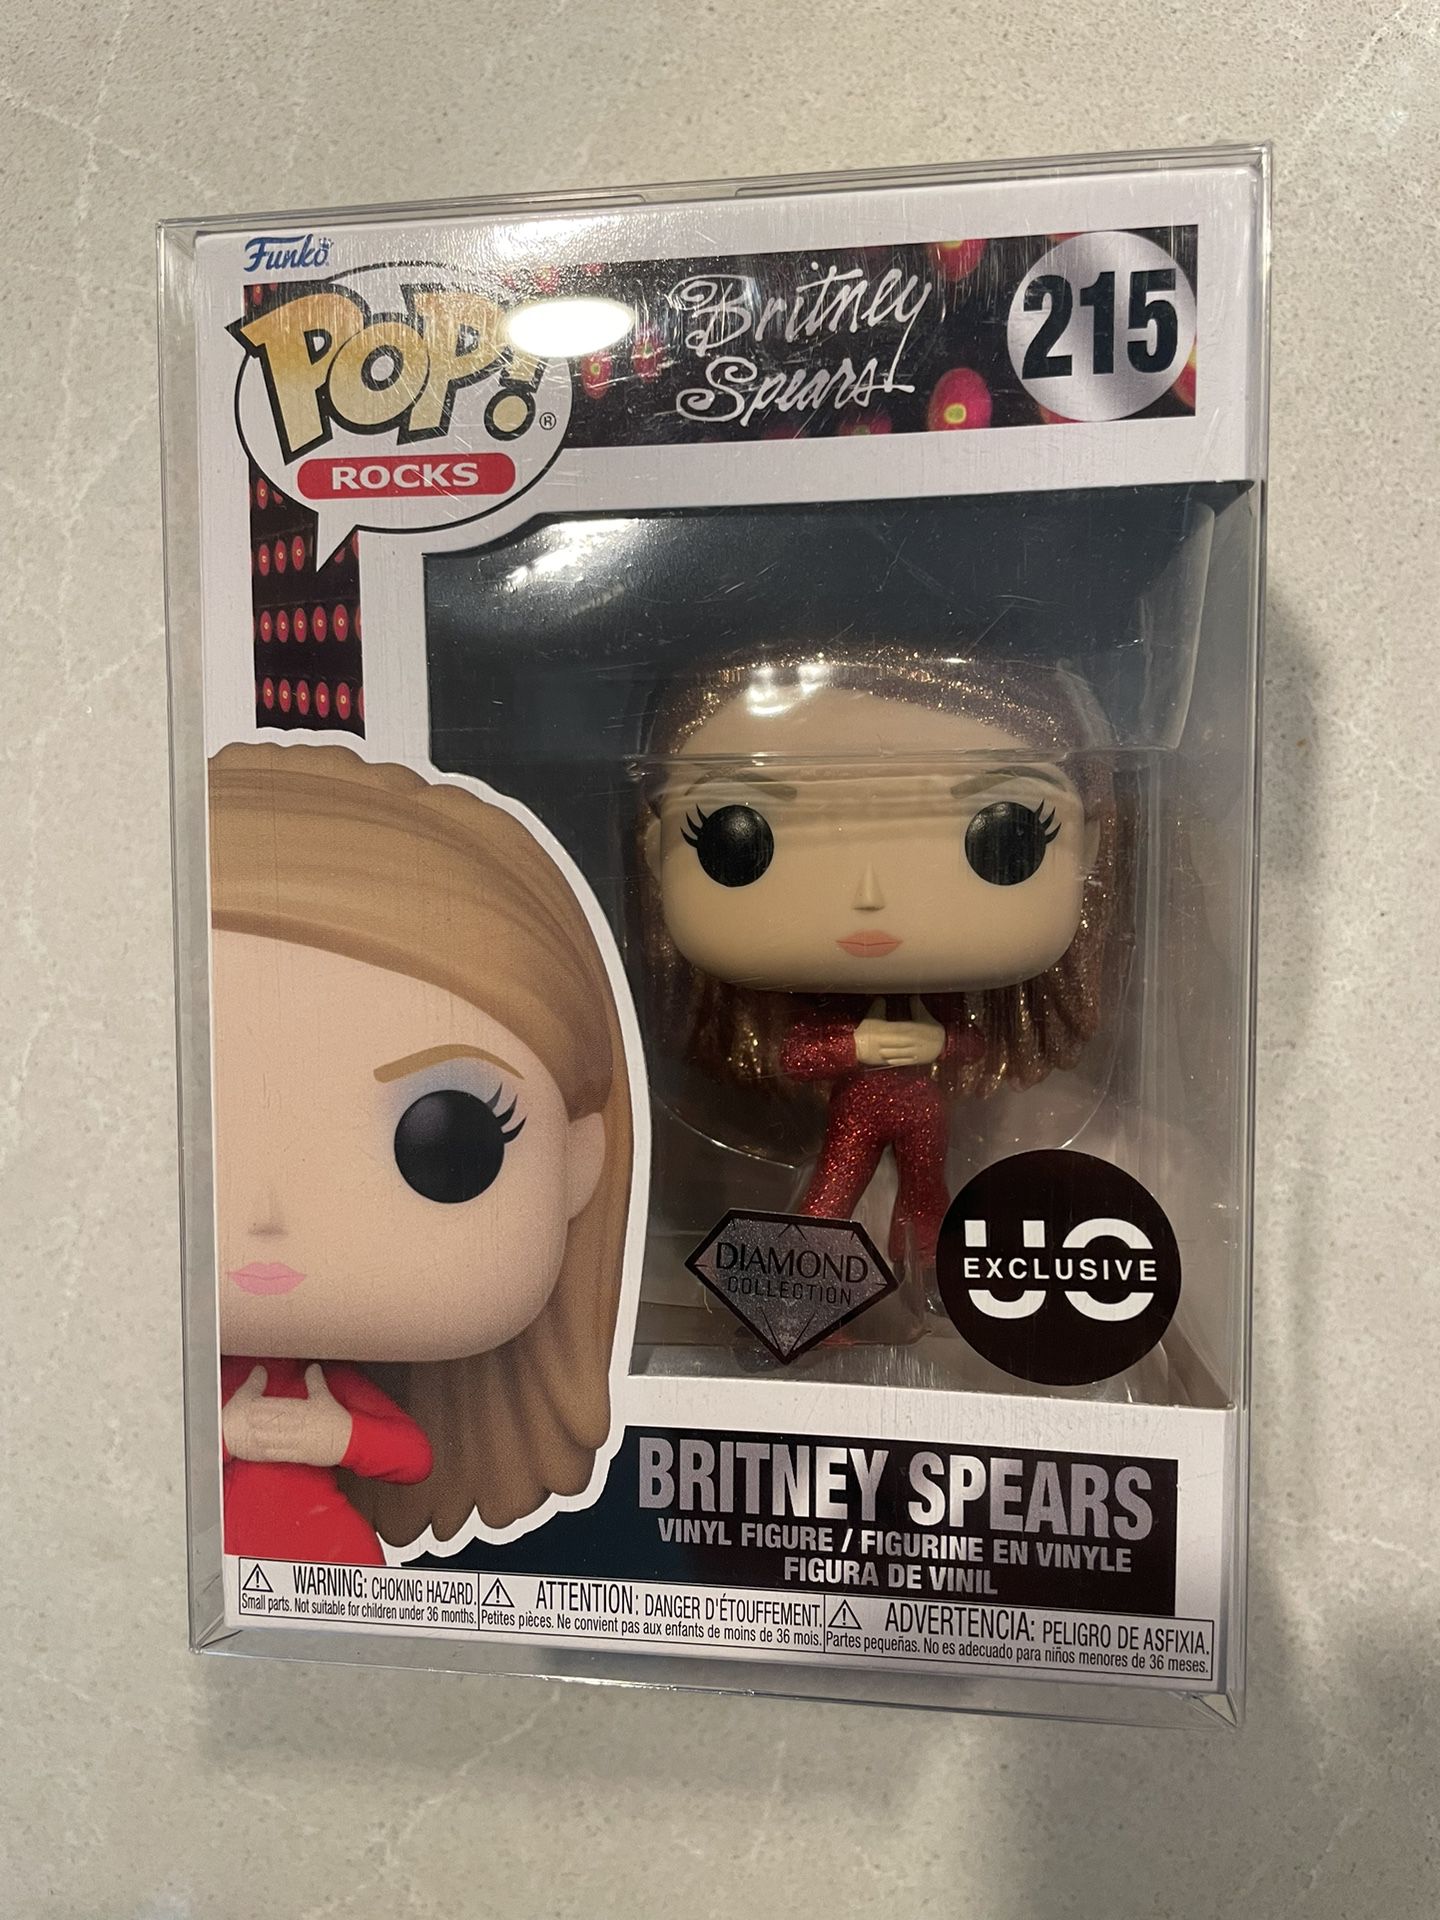 Diamond Britney Spears Catsuit Funko Pop *MINT* Urban Outfitters Exclusive Rocks 215 with Protector